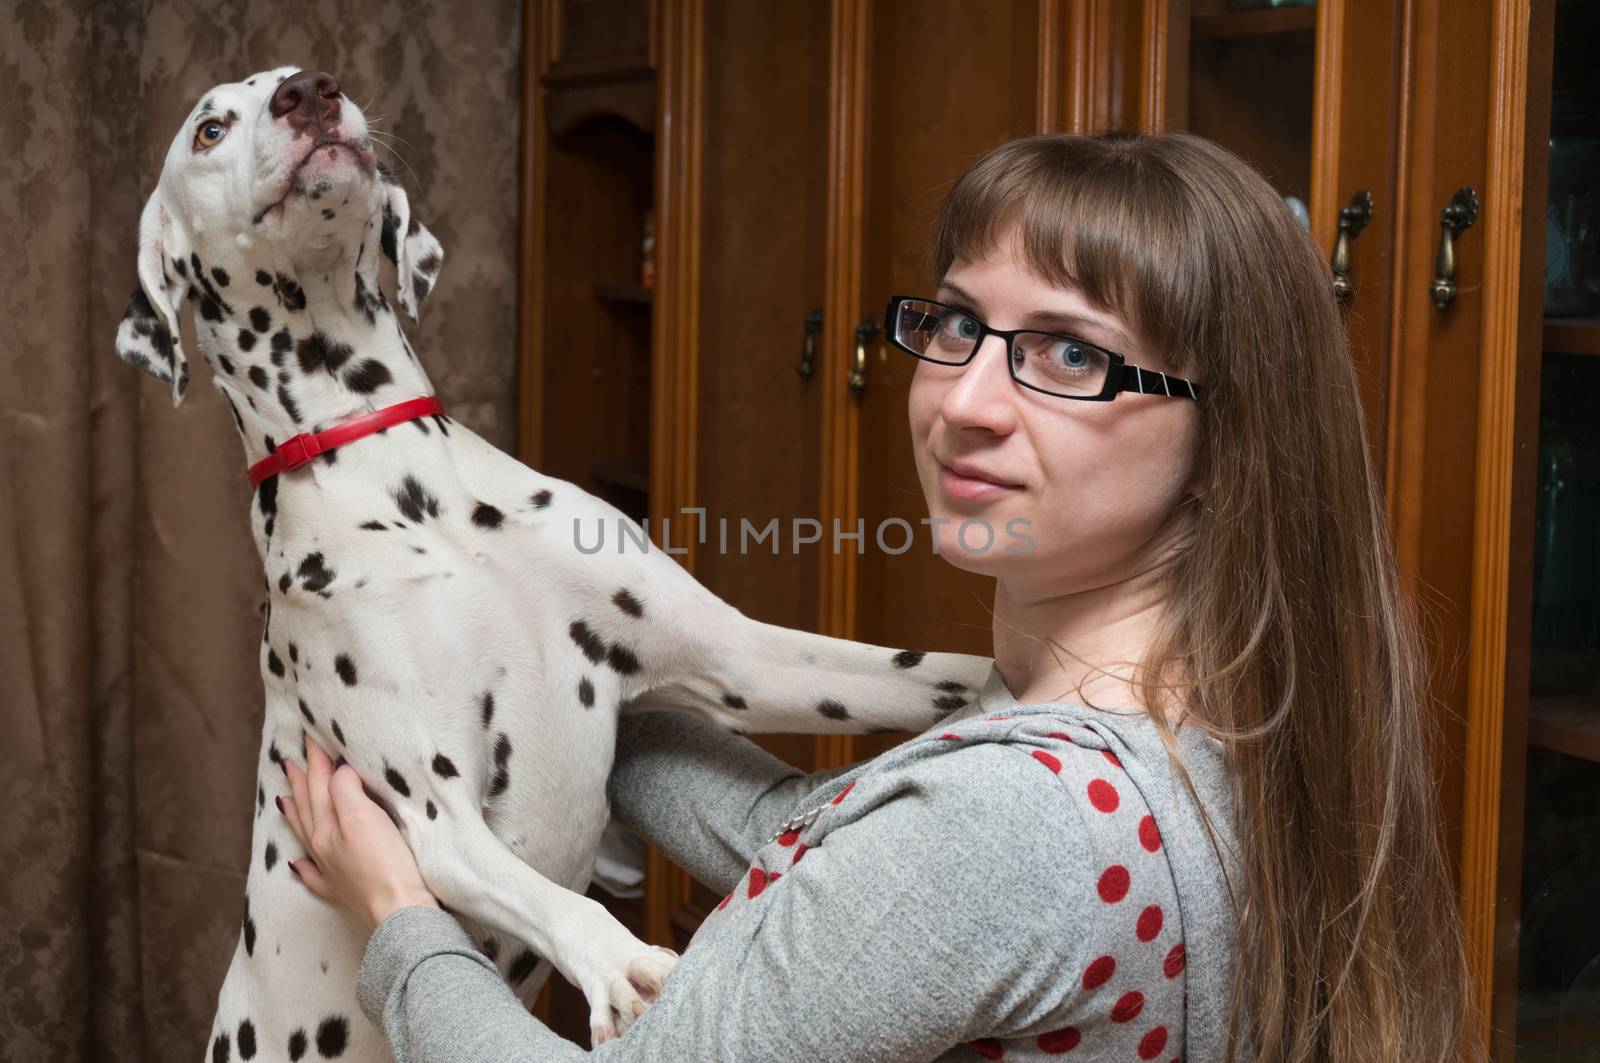 The dalmatian stands on hinder legs leaning on shoulders of the girl